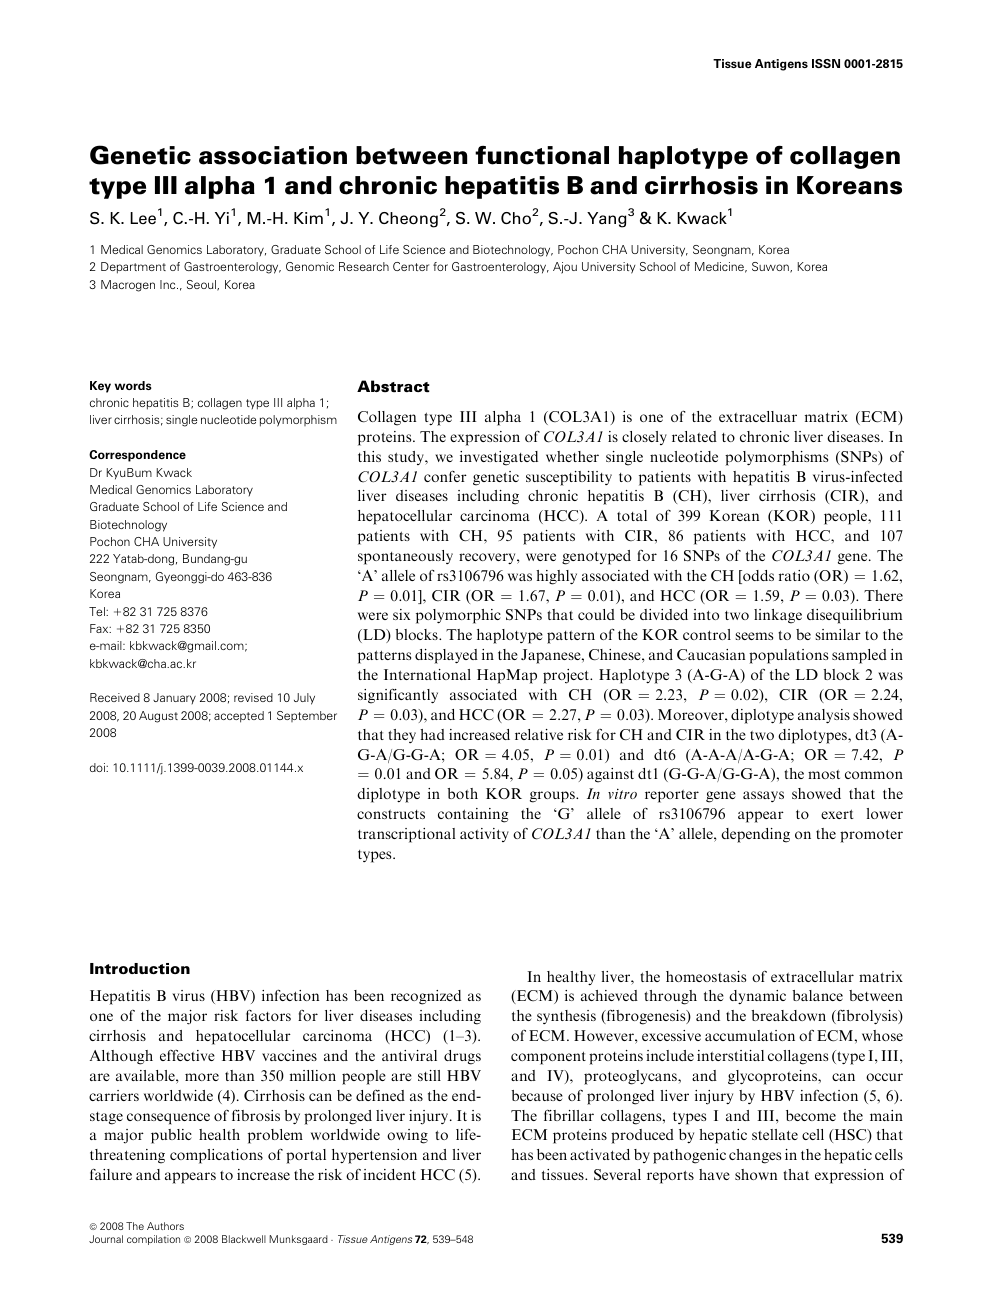 Genetic Association Between Functional Haplotype Of Collagen Type Iii Alpha 1 And Chronic Hepatitis B And Cirrhosis In Koreans Topic Of Research Paper In Biological Sciences Download Scholarly Article Pdf And